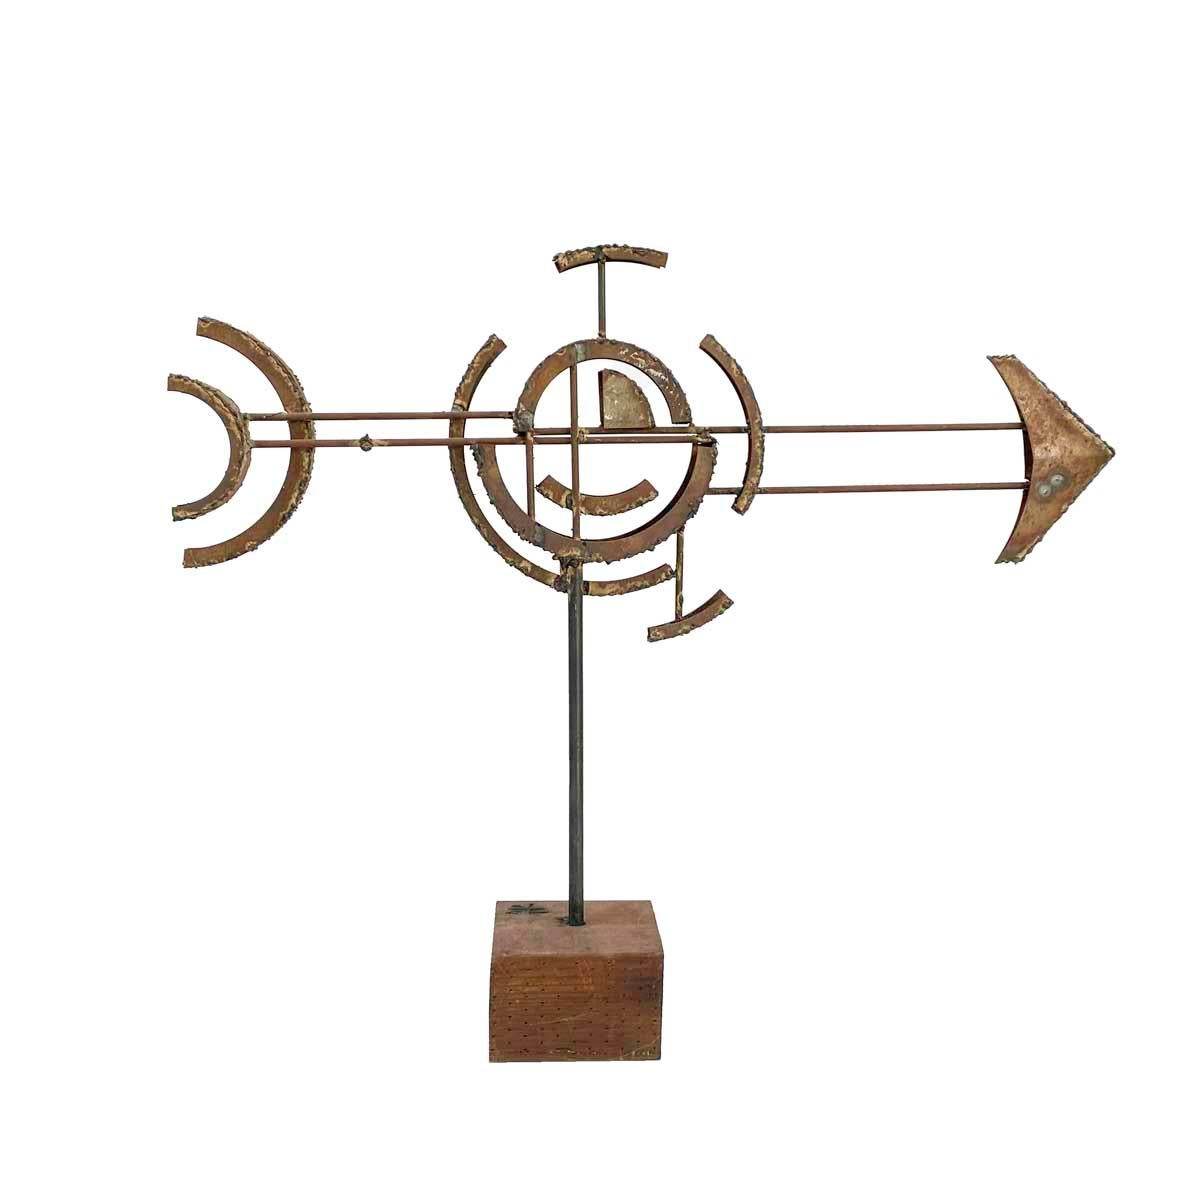 Welded metal sculpture in the Brutalist style by California sculptor Frank Cota and signed FC on the wood base. The sculpture in two dimensions, weathervane-like, of an arrow through a burst sphere.